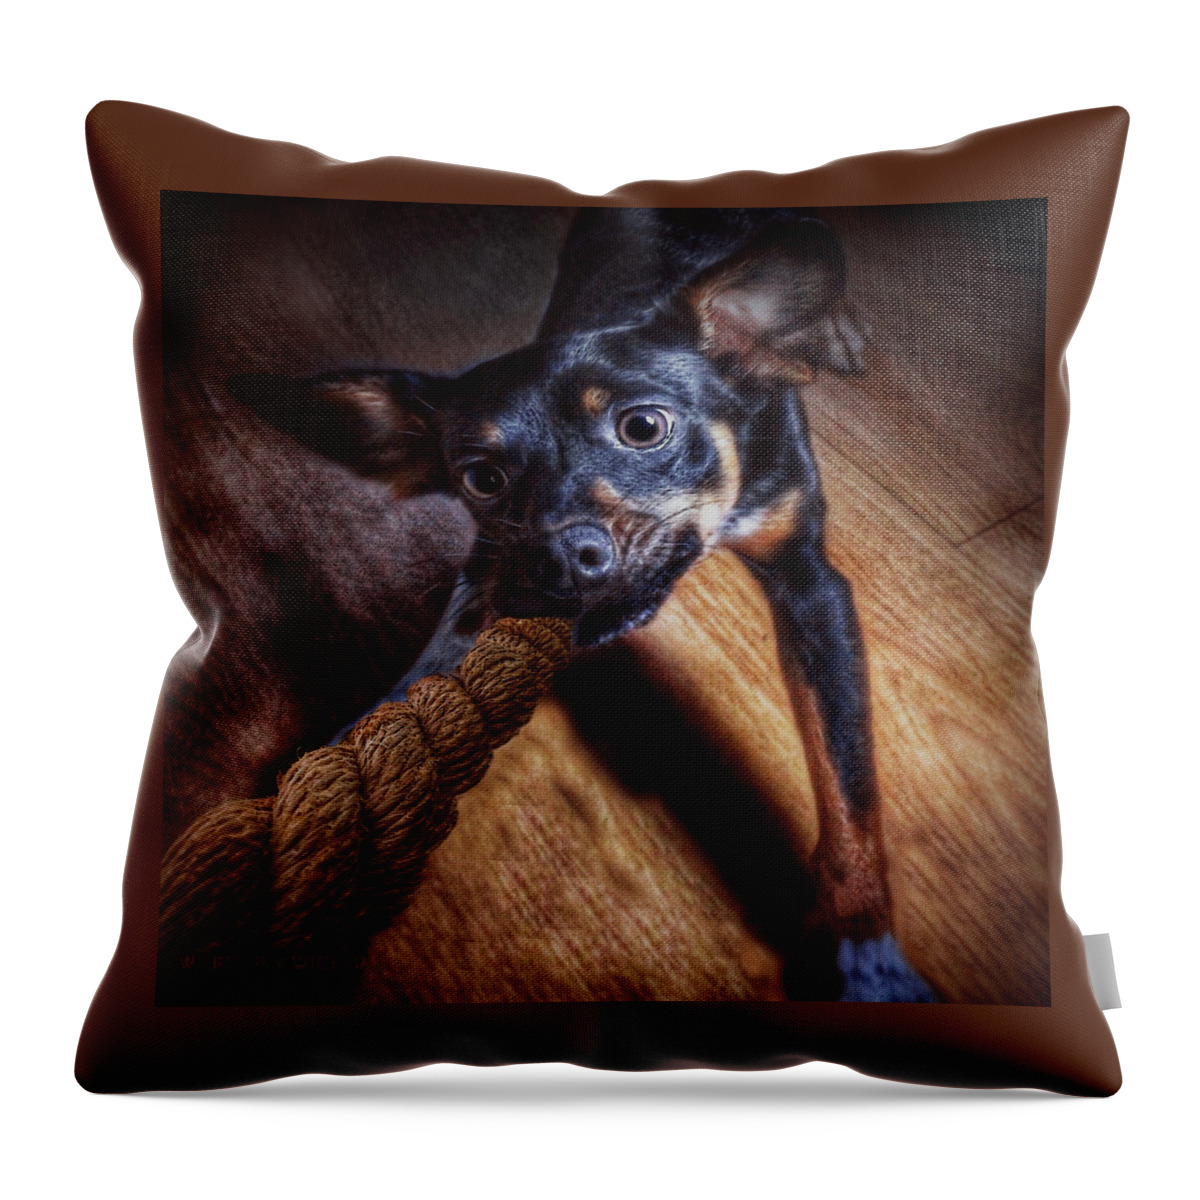 Dog Throw Pillow featuring the photograph Tenacity by Brenda Wilcox aka Wildeyed n Wicked